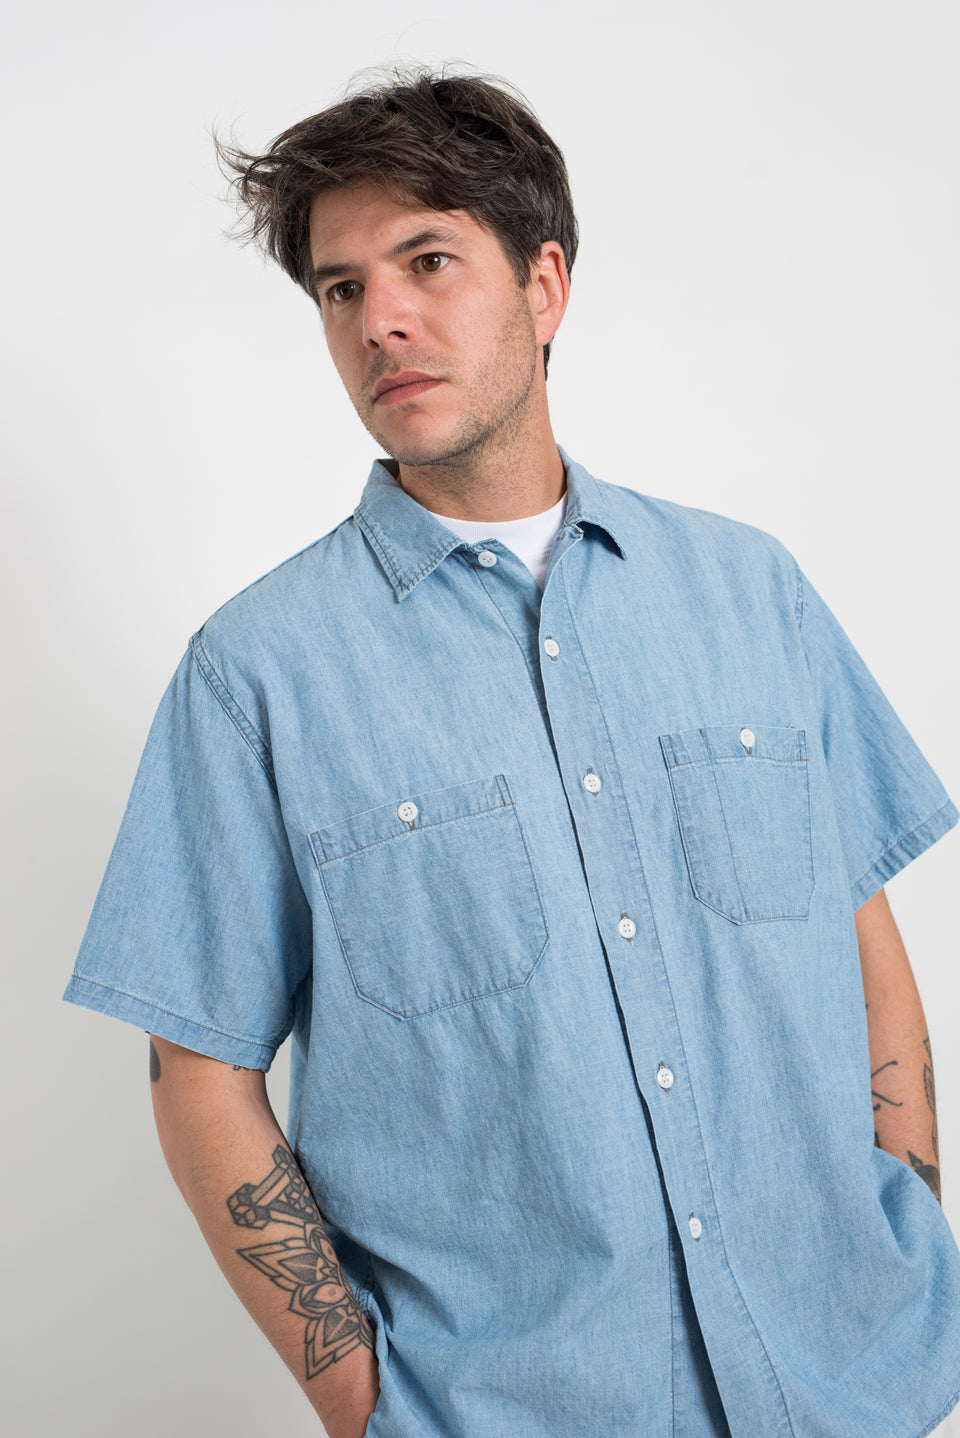 OrSlow 23SS SS23 01-0869-99 Chambray 60's Work Shirt Bleached Calculus Victoria BC Canada